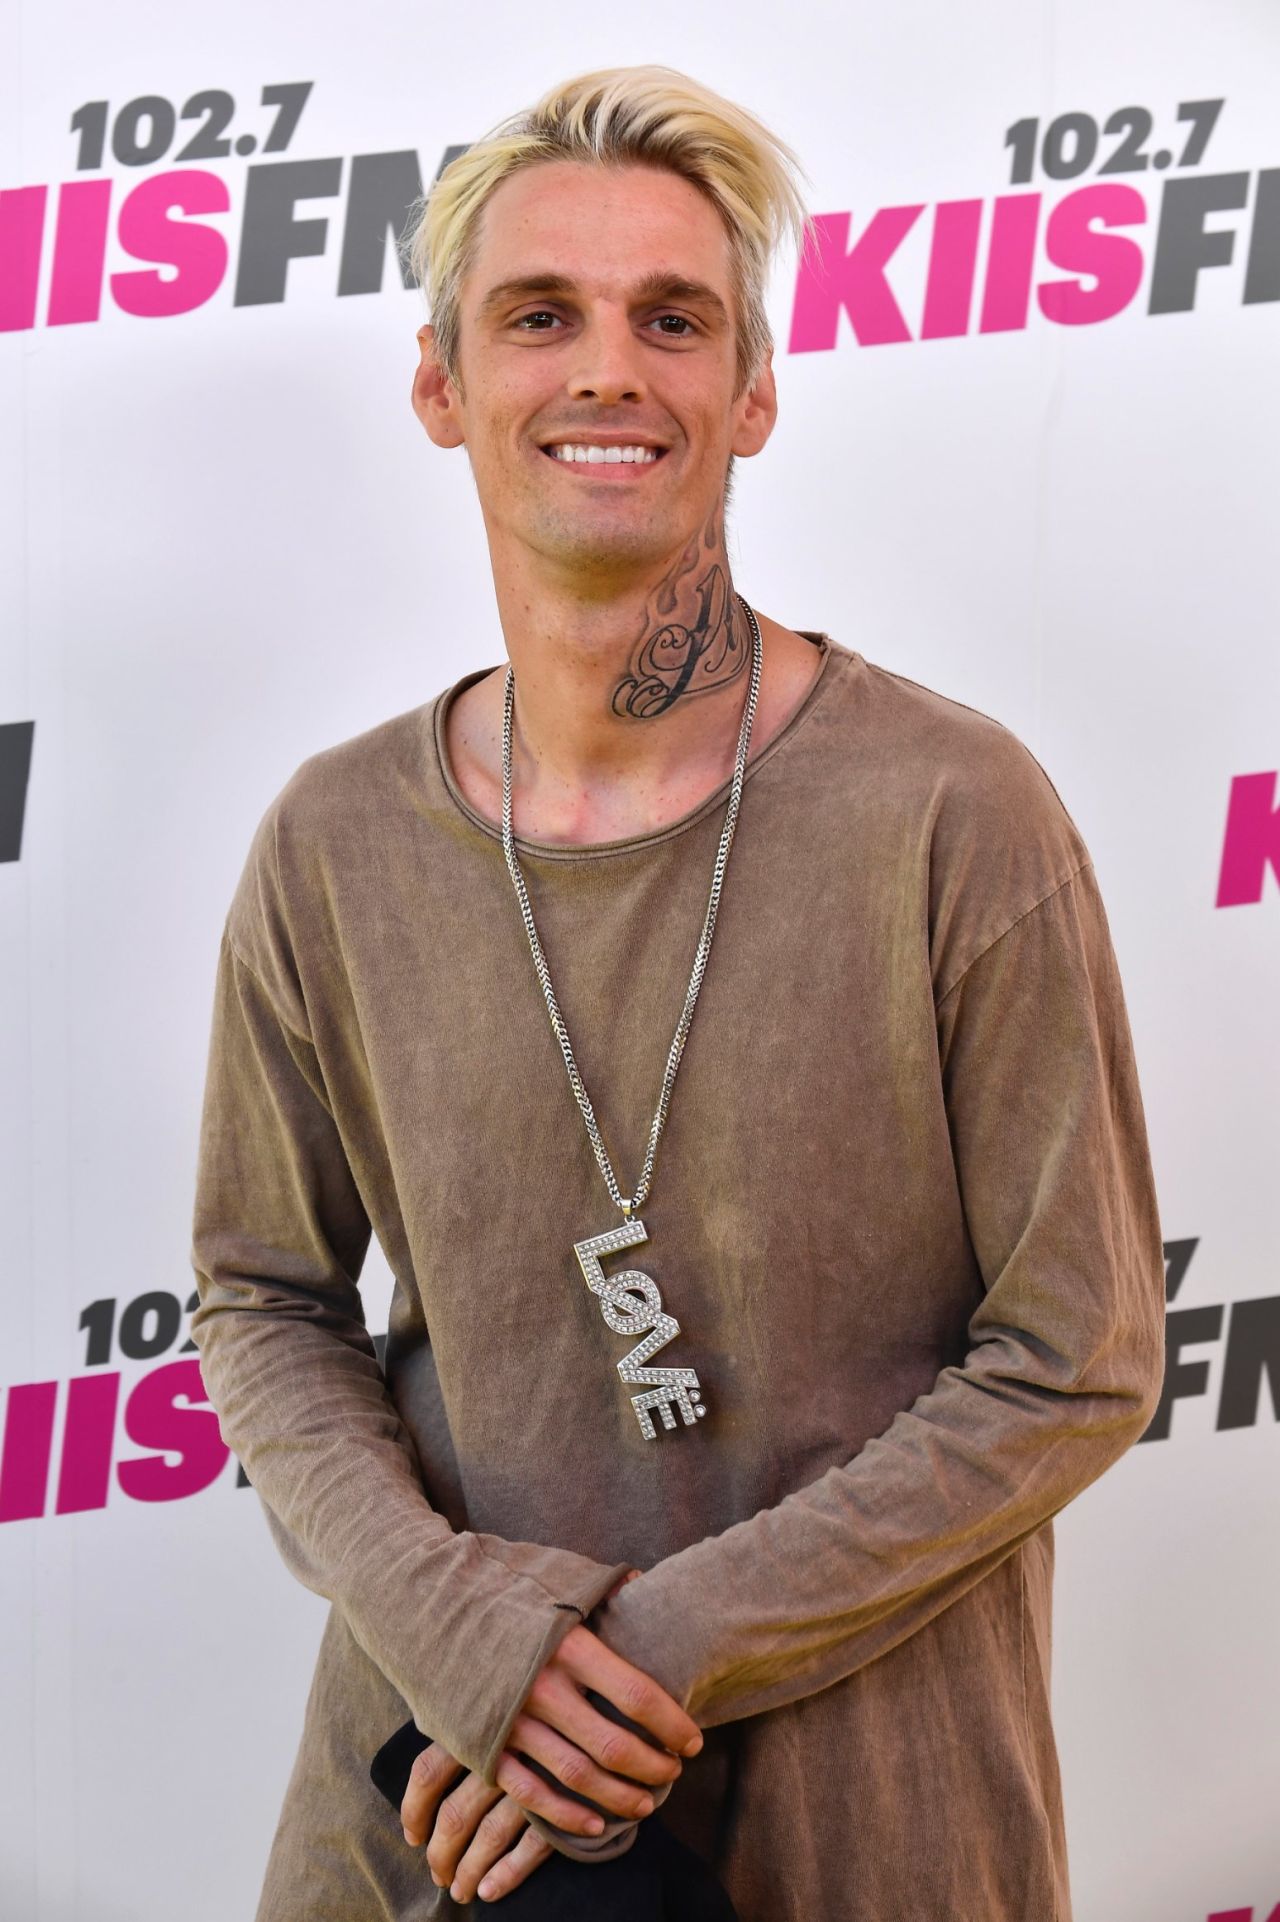 Boy Anti Xxx - Aaron Carter comes out as bisexual | CNN